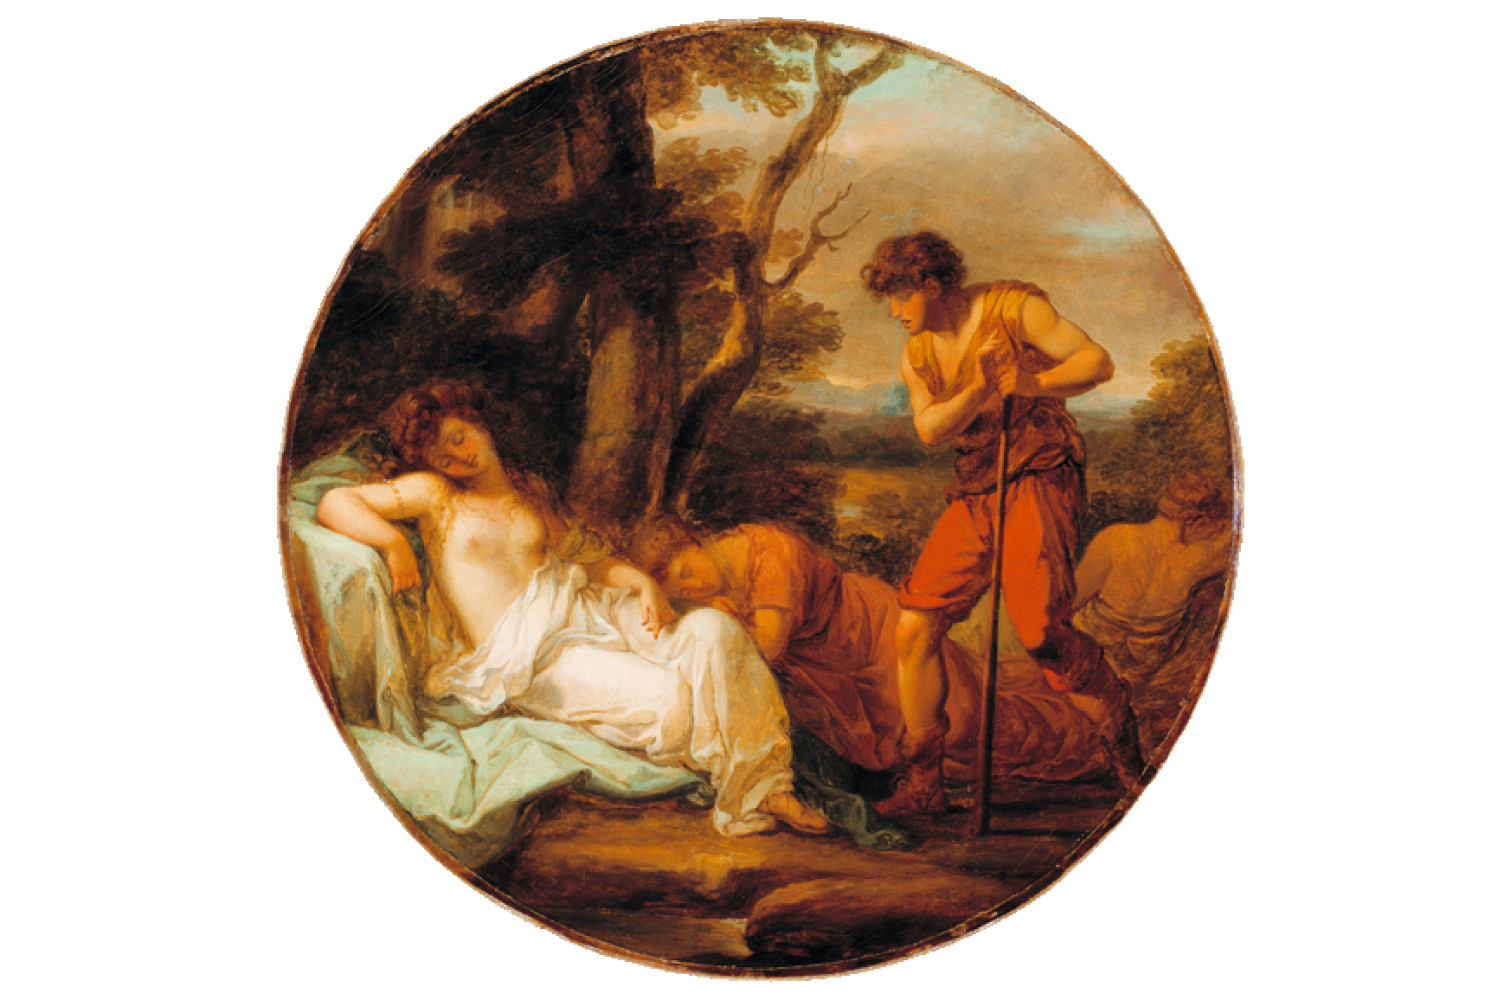 Cymon and Iphigenia, ca. 1780, by Angelica Kauffman (Swiss, 1741-1807); oil on canvas; 32 3/4 x 32 3/4 inches; Gift of Alicia Hopton Middleton; 1937.005.0015
